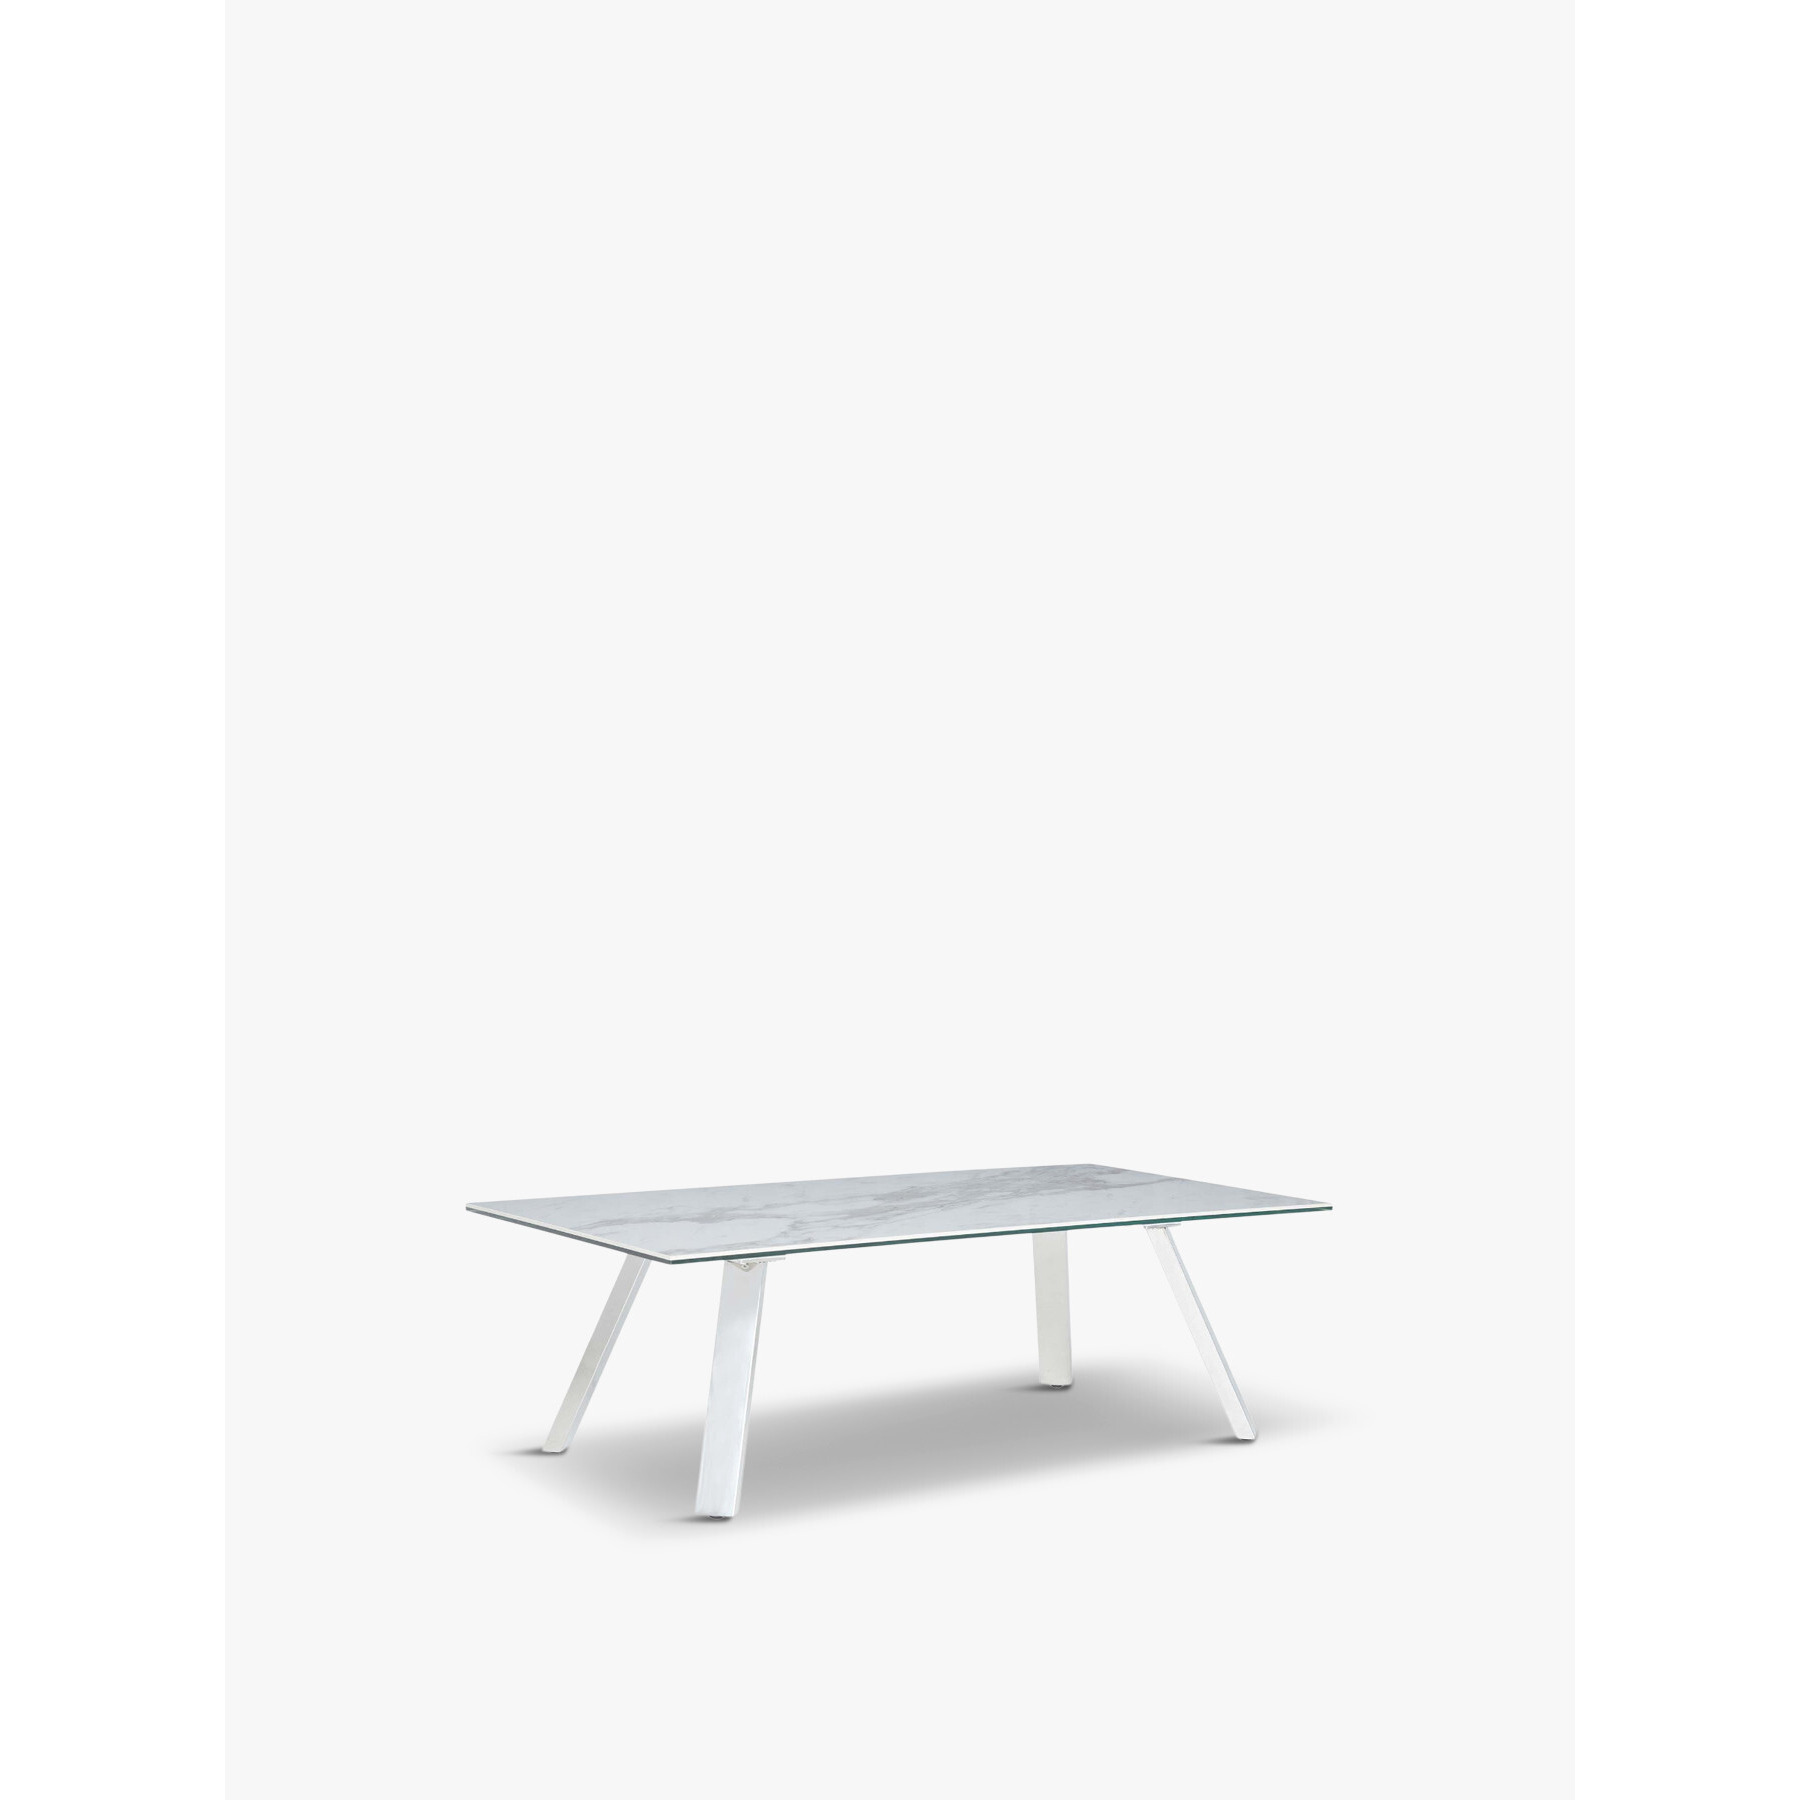 Barker and Stonehouse Ginostra Coffee Table, White Marble - image 1